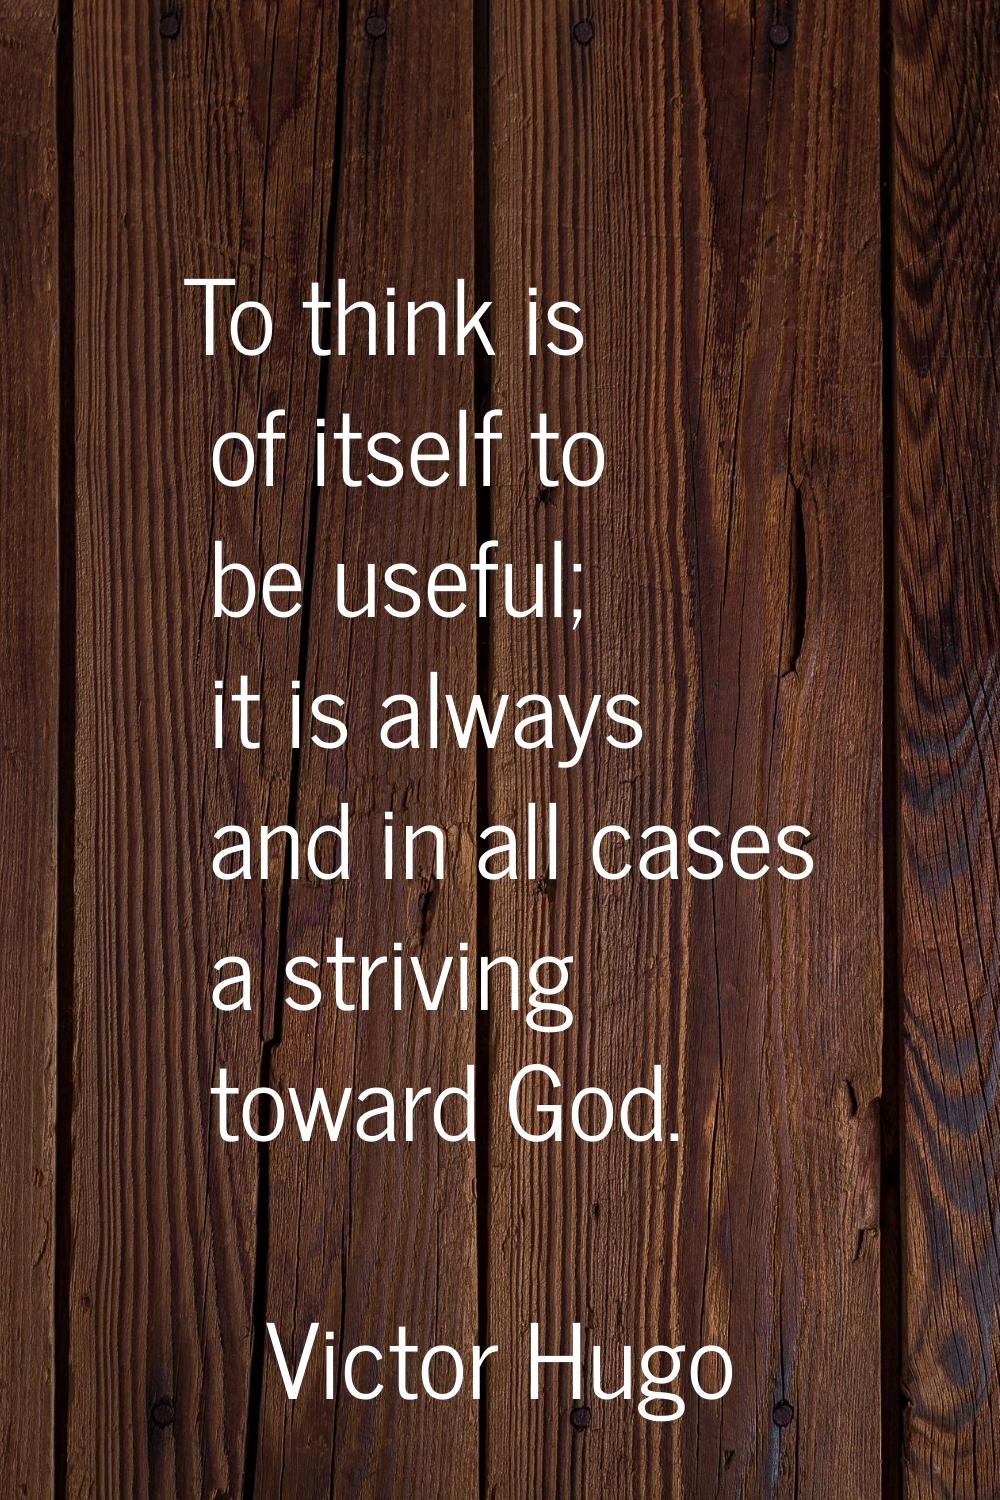 To think is of itself to be useful; it is always and in all cases a striving toward God.